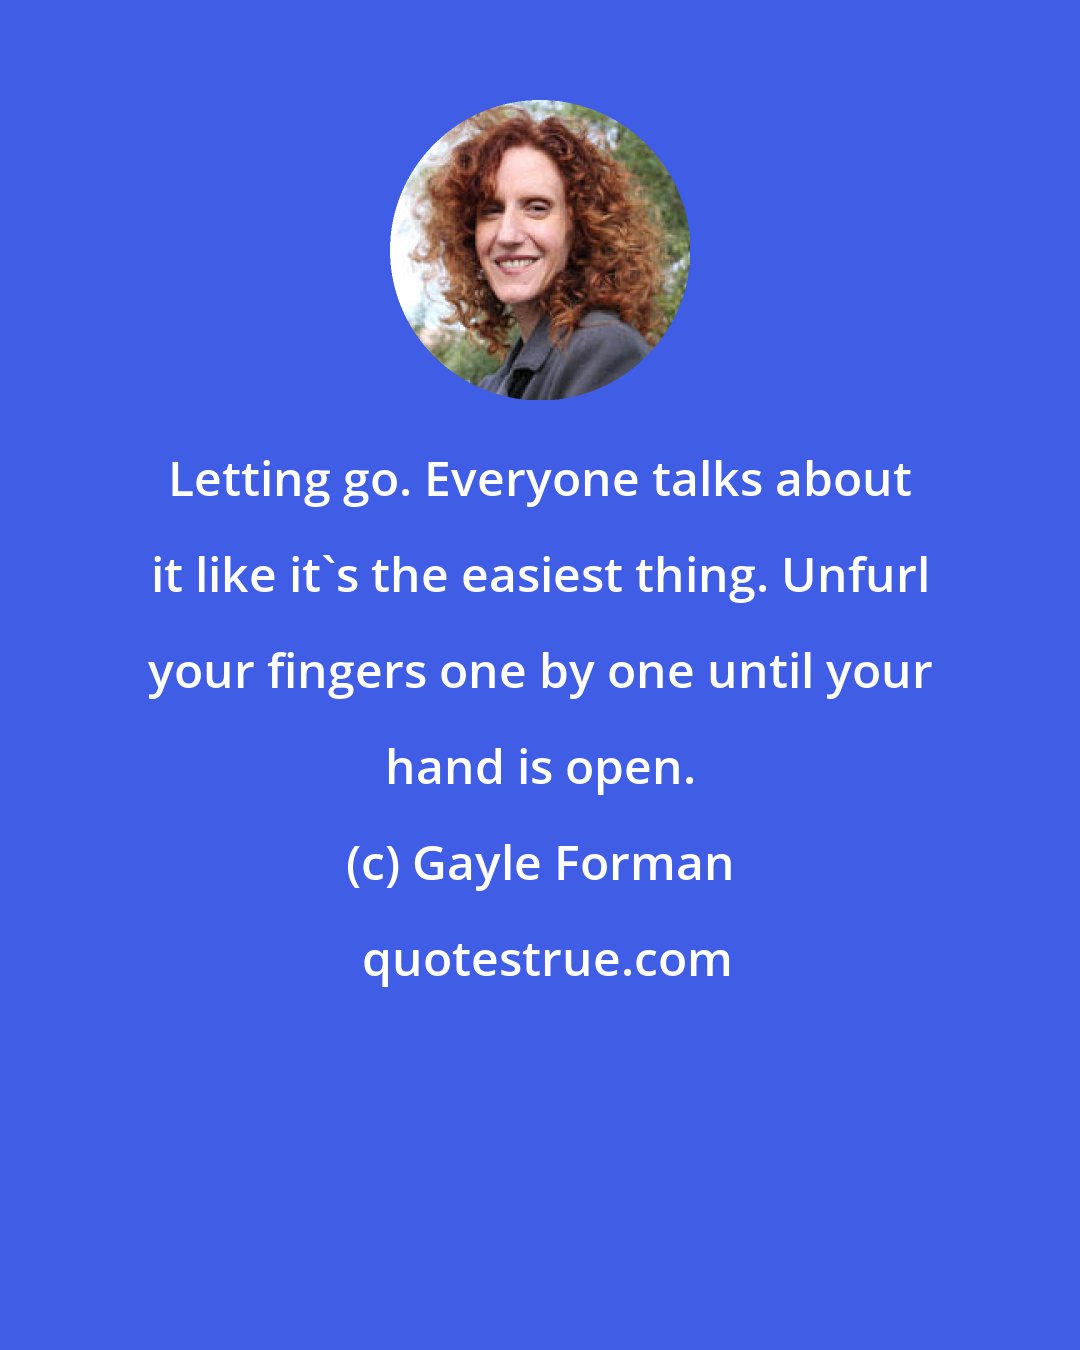 Gayle Forman: Letting go. Everyone talks about it like it's the easiest thing. Unfurl your fingers one by one until your hand is open.